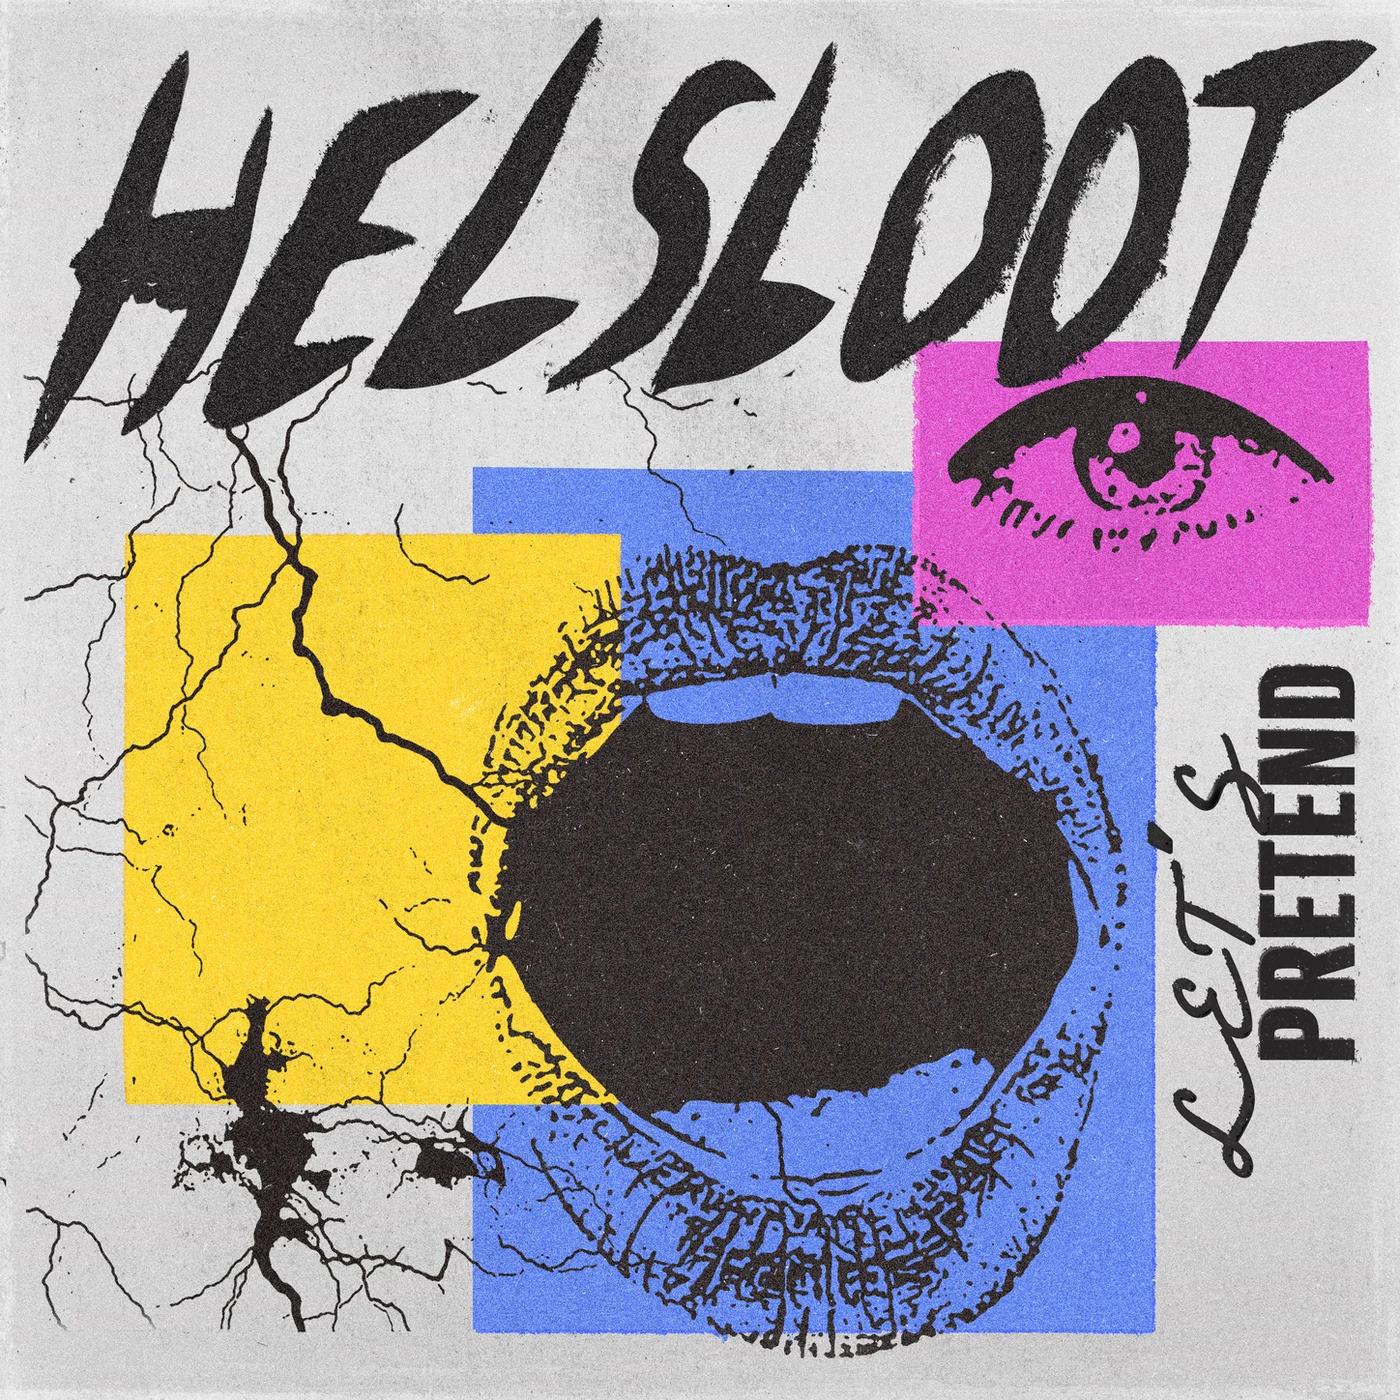 Helsloot - Let's Pretend (Extended Mix)